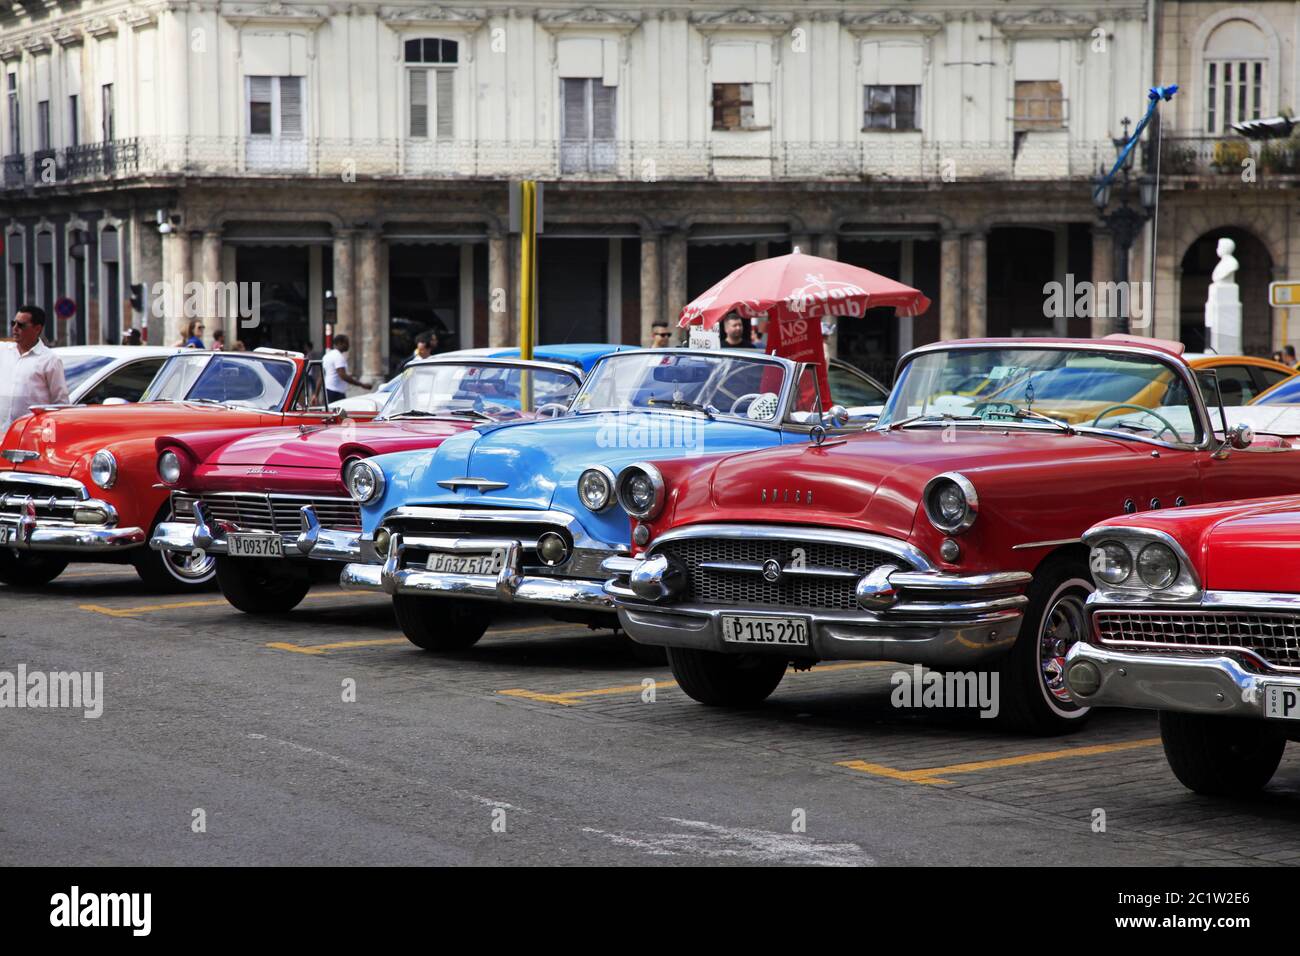 Vintage cars on the streets of colorful Havana Stock Photo